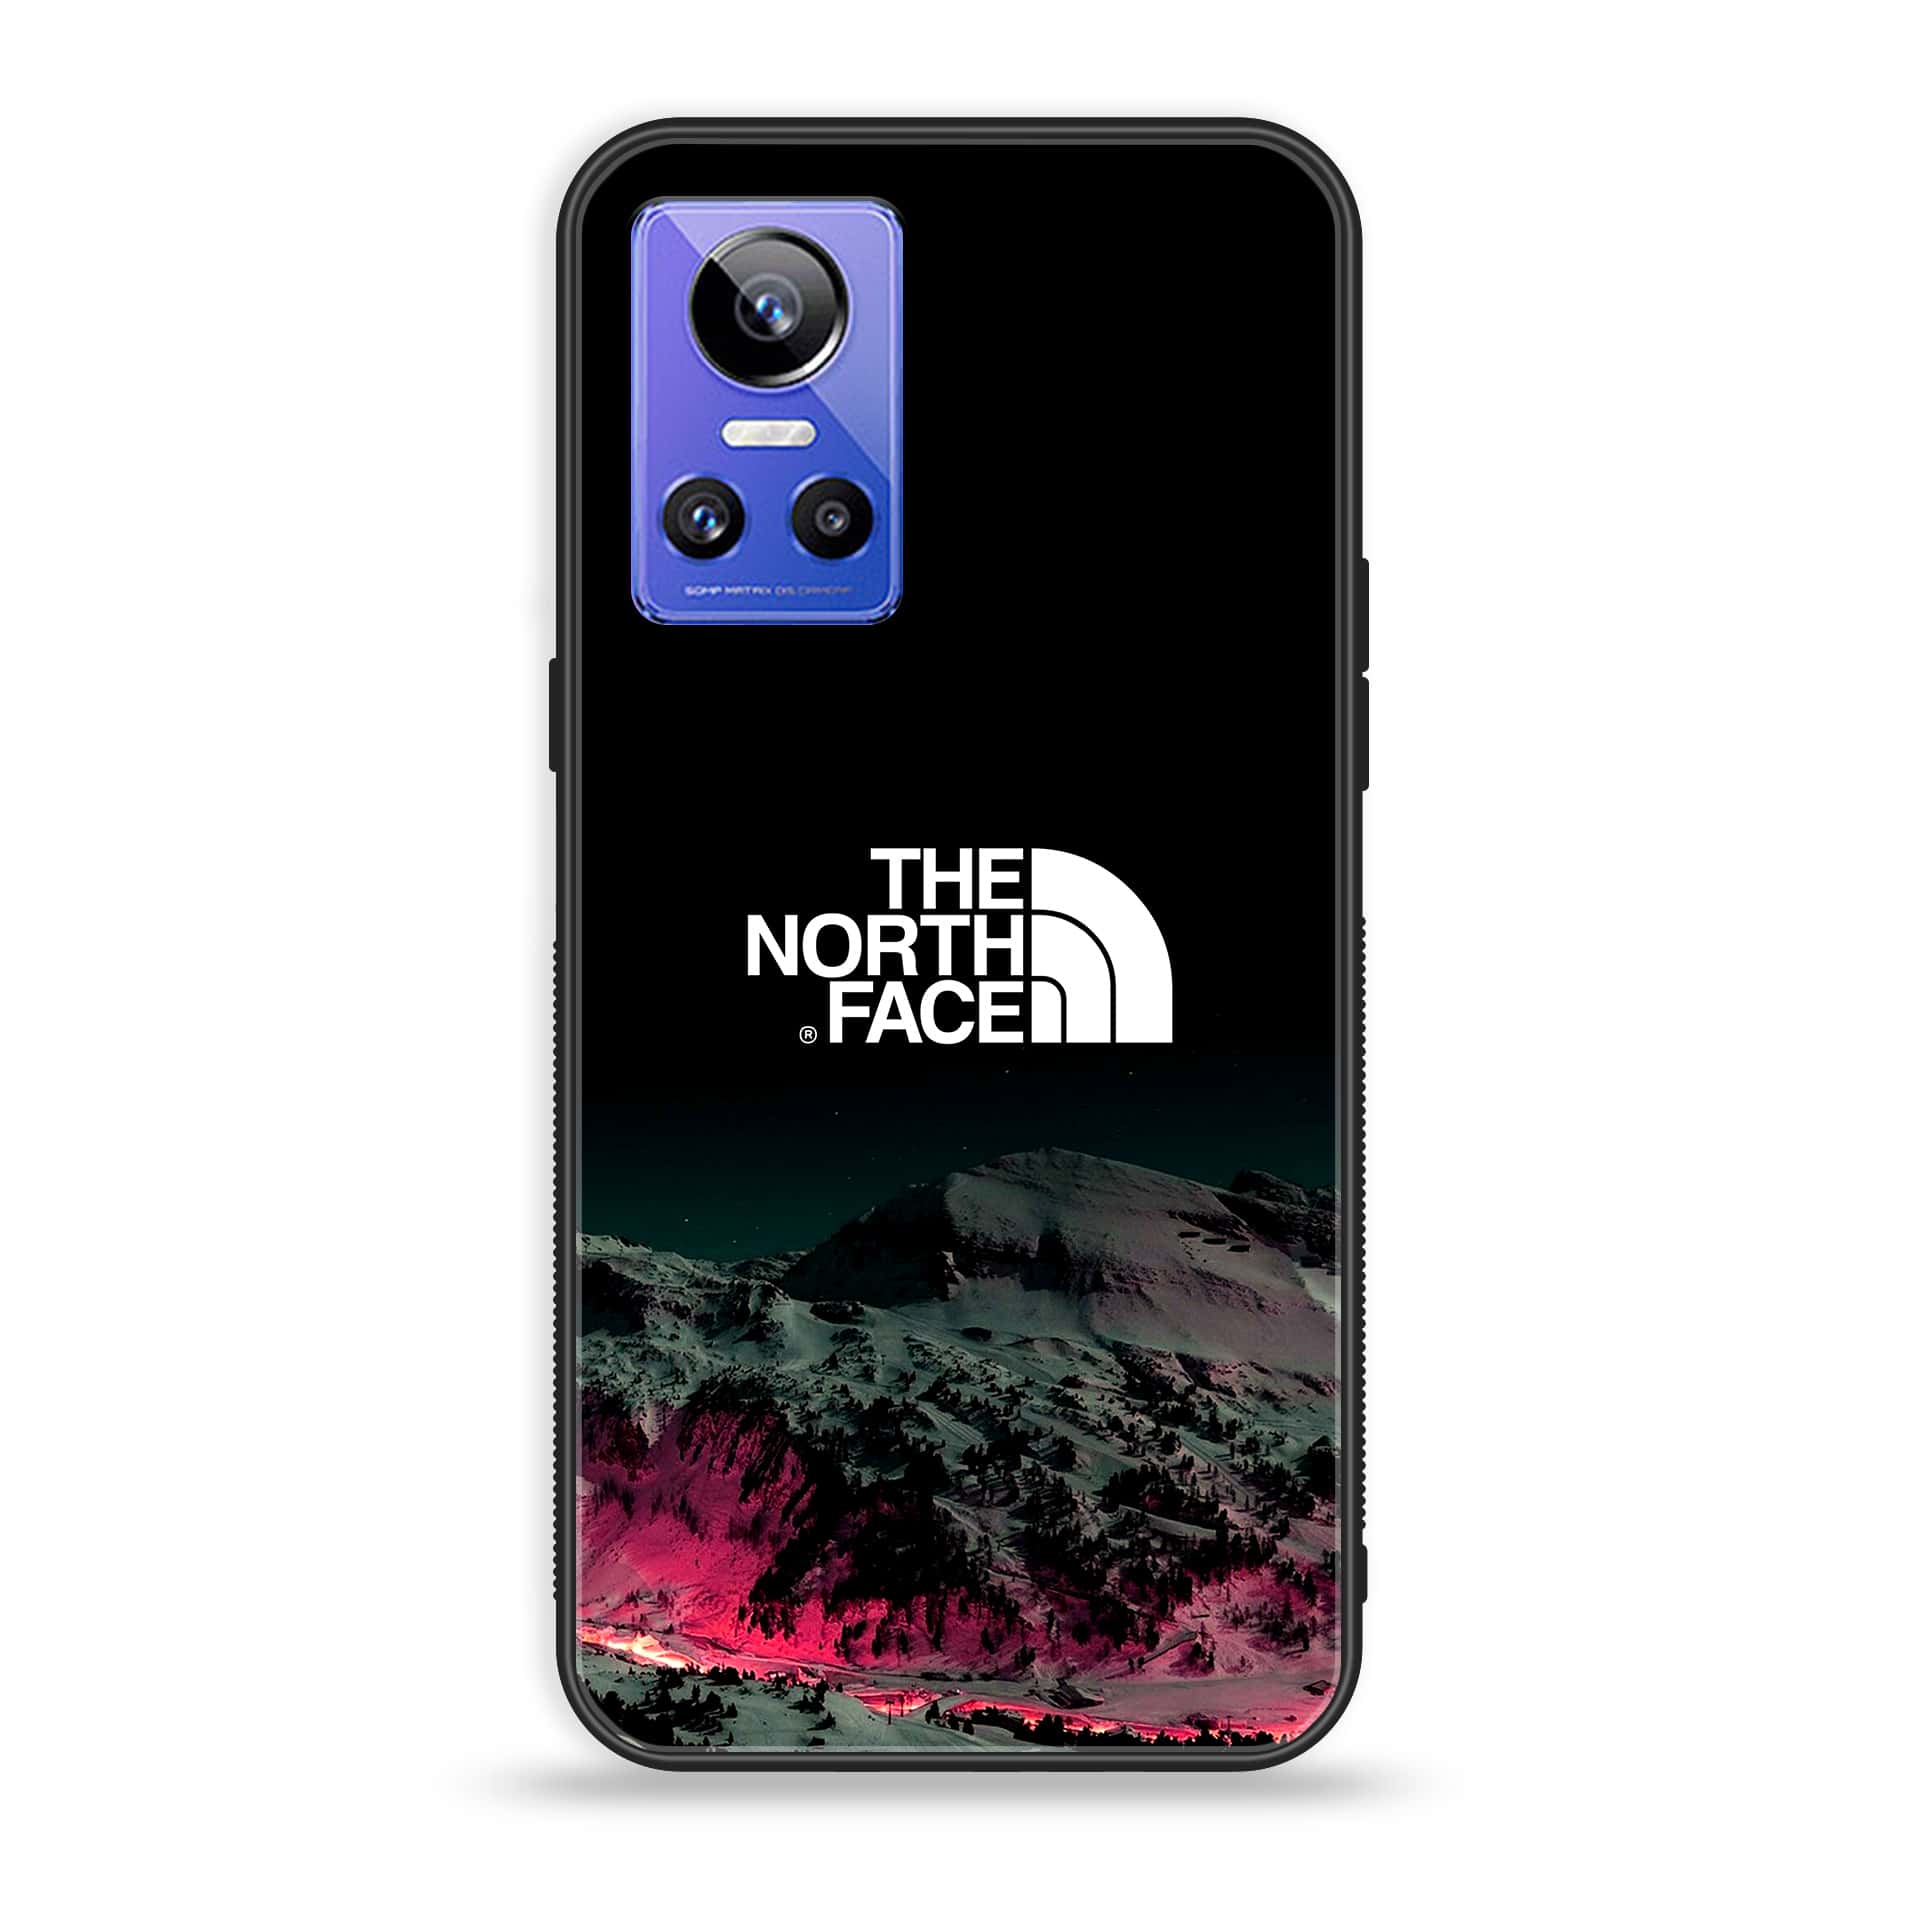 Realme GT Neo 3 - The North Face Series - Premium Printed Glass soft Bumper shock Proof Case